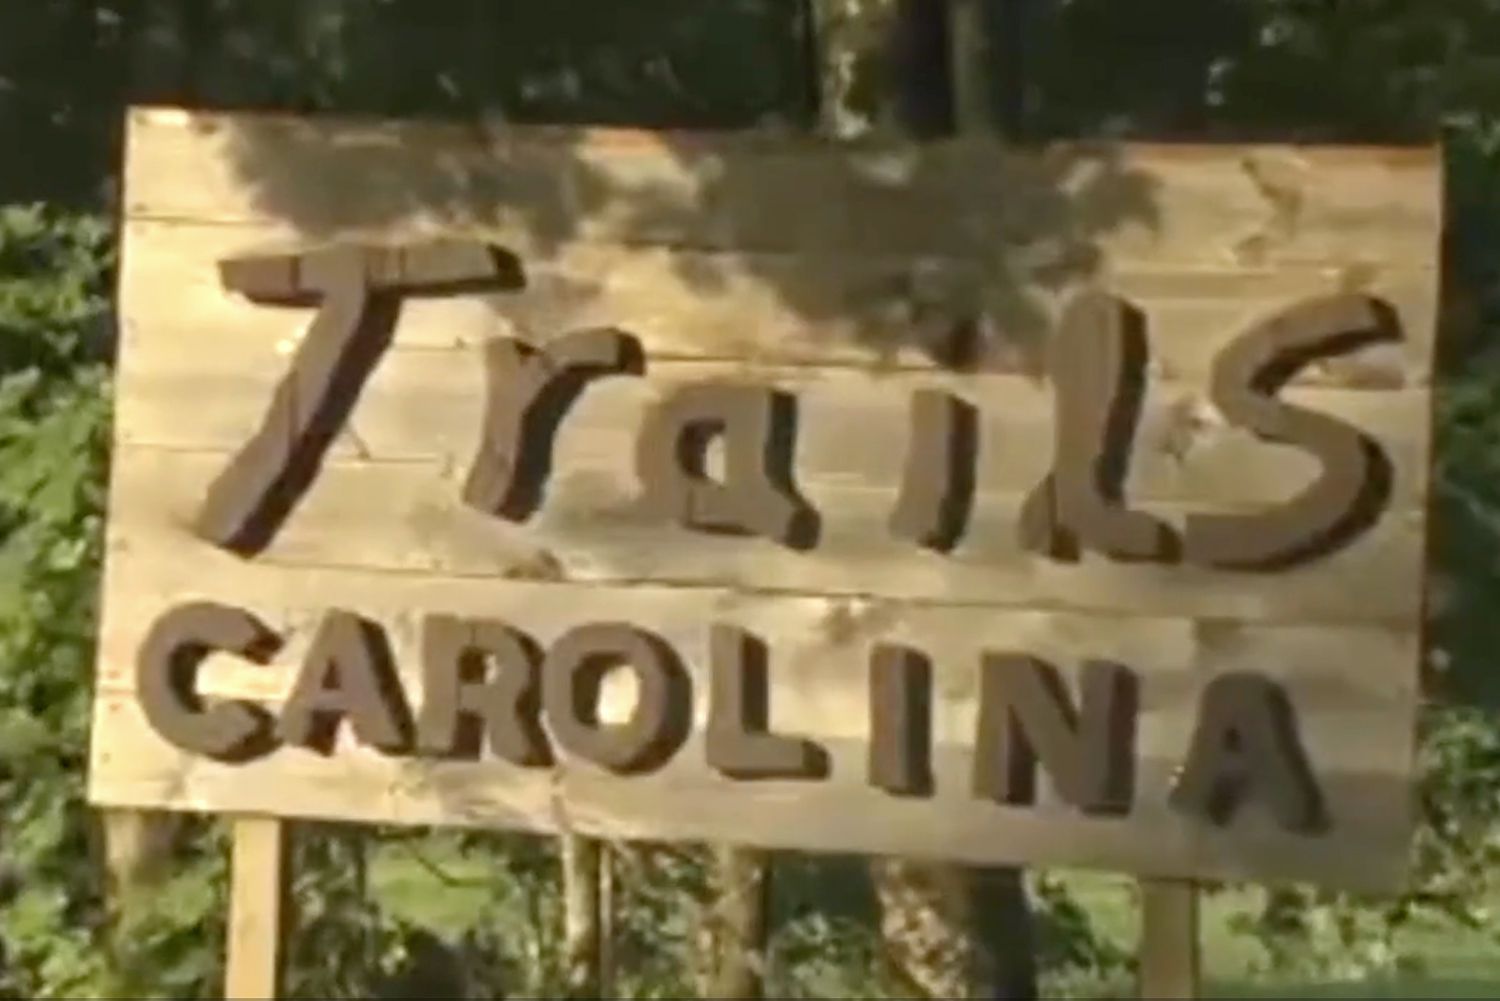 What Caused the Death of Boy, 12, at ‘Troubled Teen Wilderness Camp? [Video]